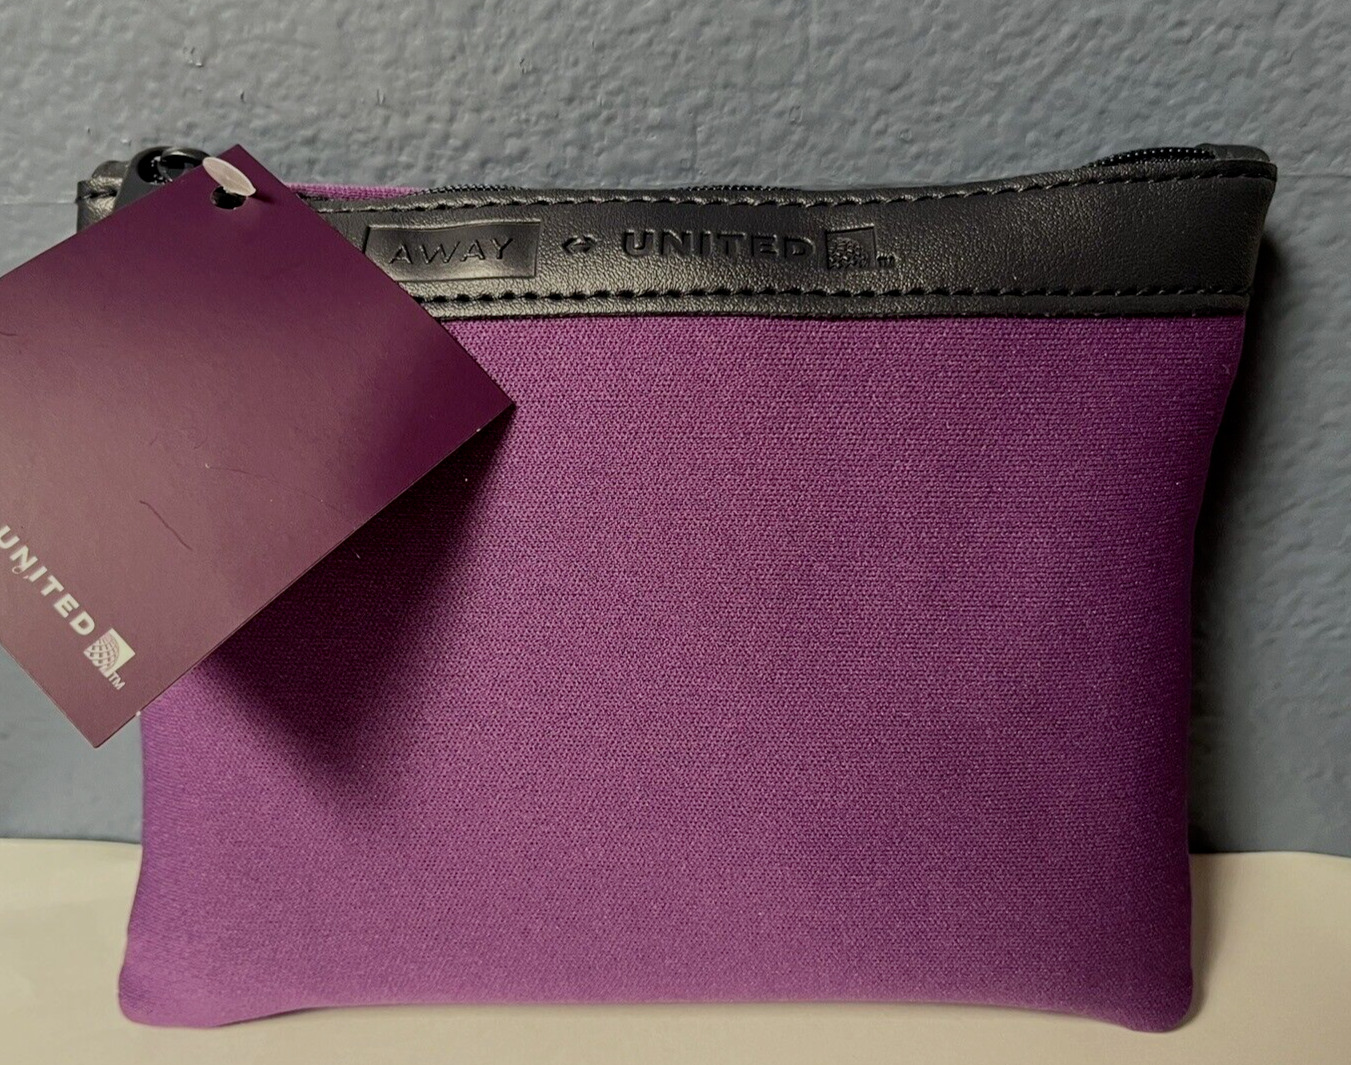 UNITED AIRLINES AWAY SUNDAY RILEY Business First Purple Neoprene Amenity Kit Bag